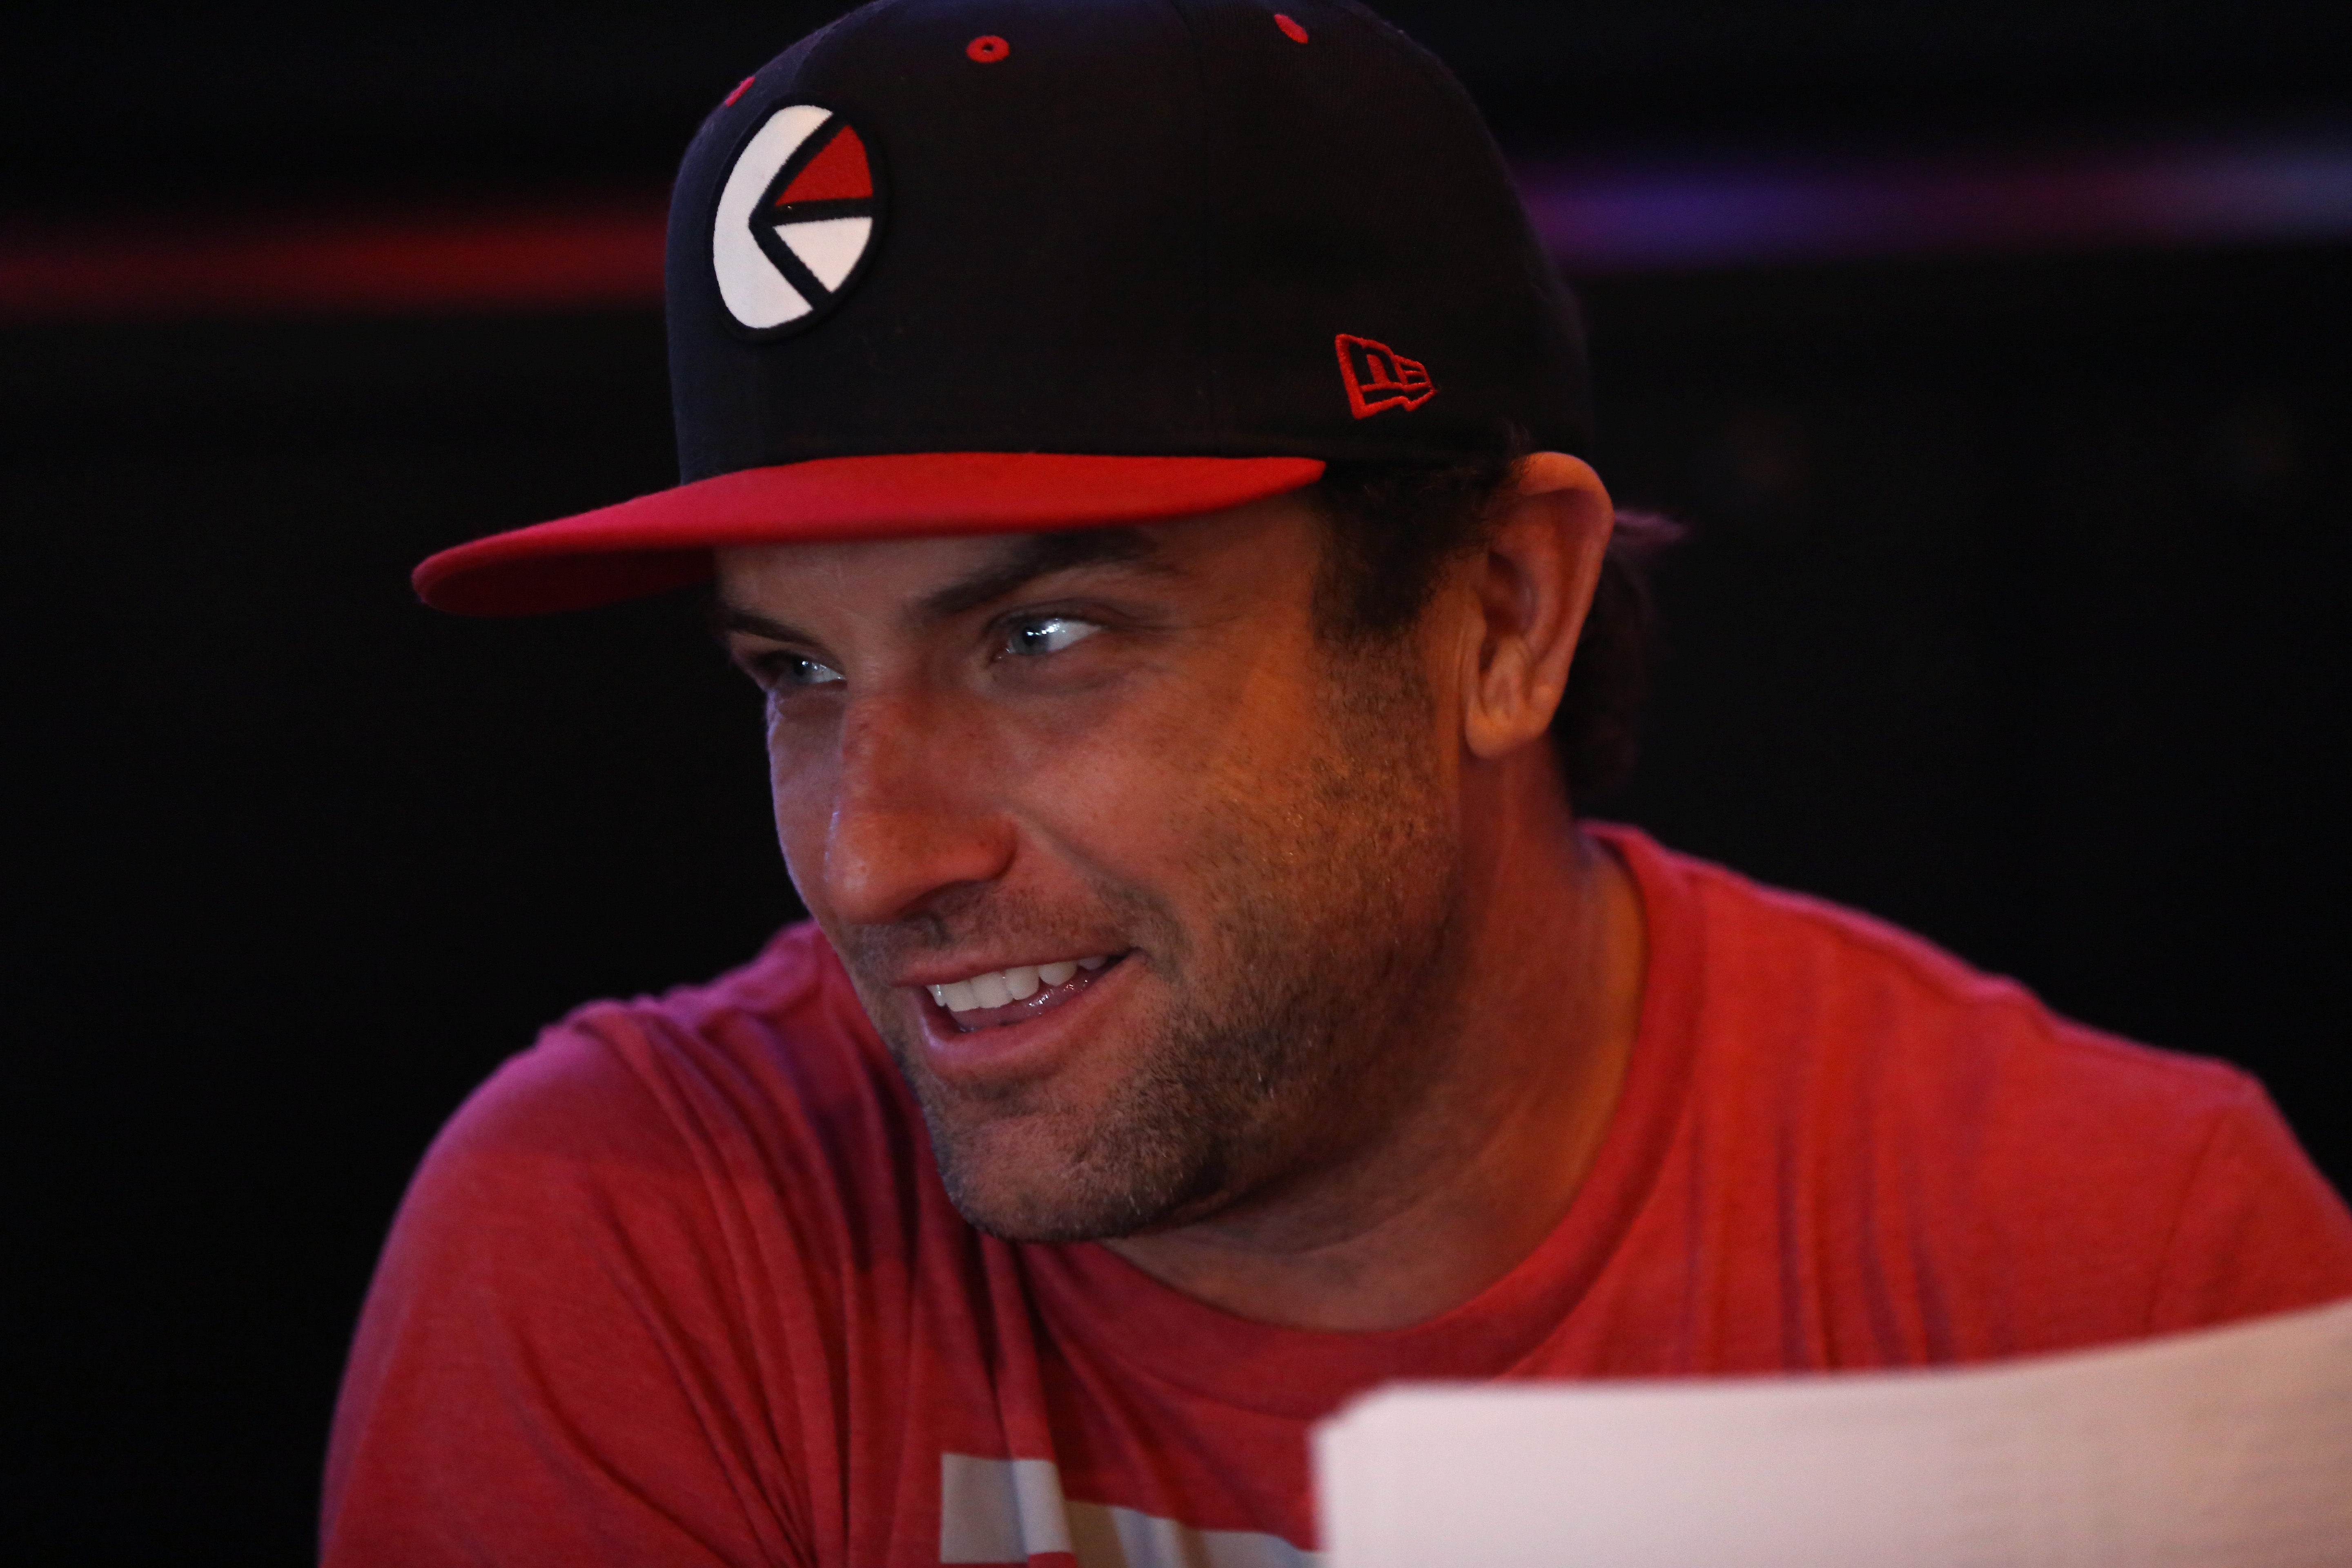 TJ Lavin smiling at the Touchdown for Charity's celebrity fantasy football draft